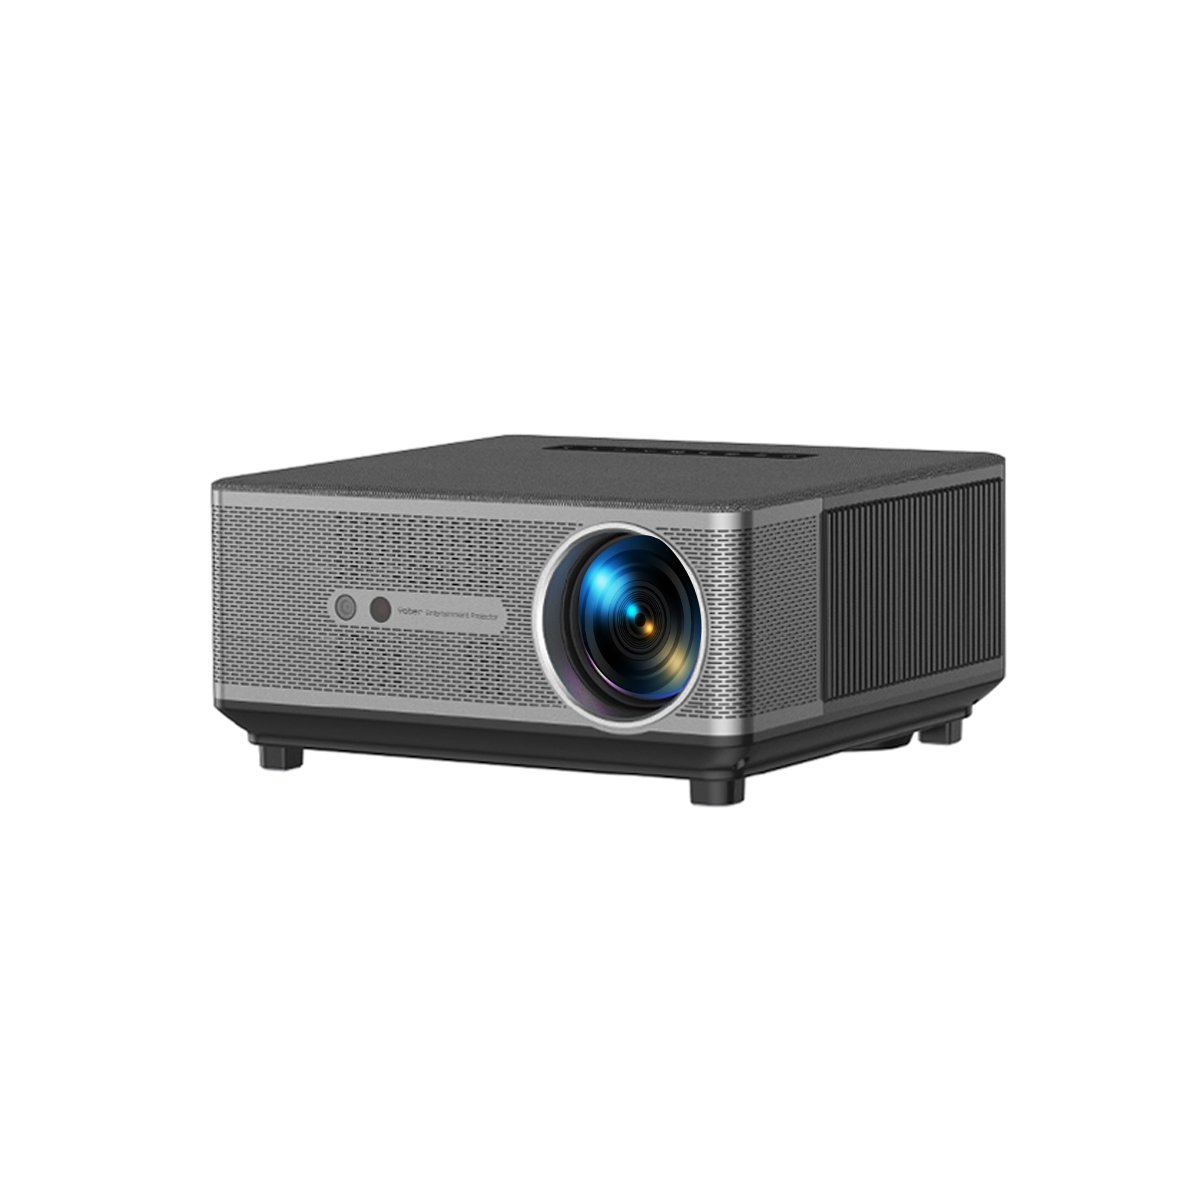 YABER PROJECTOR K1 - YABER Entertainment Projector